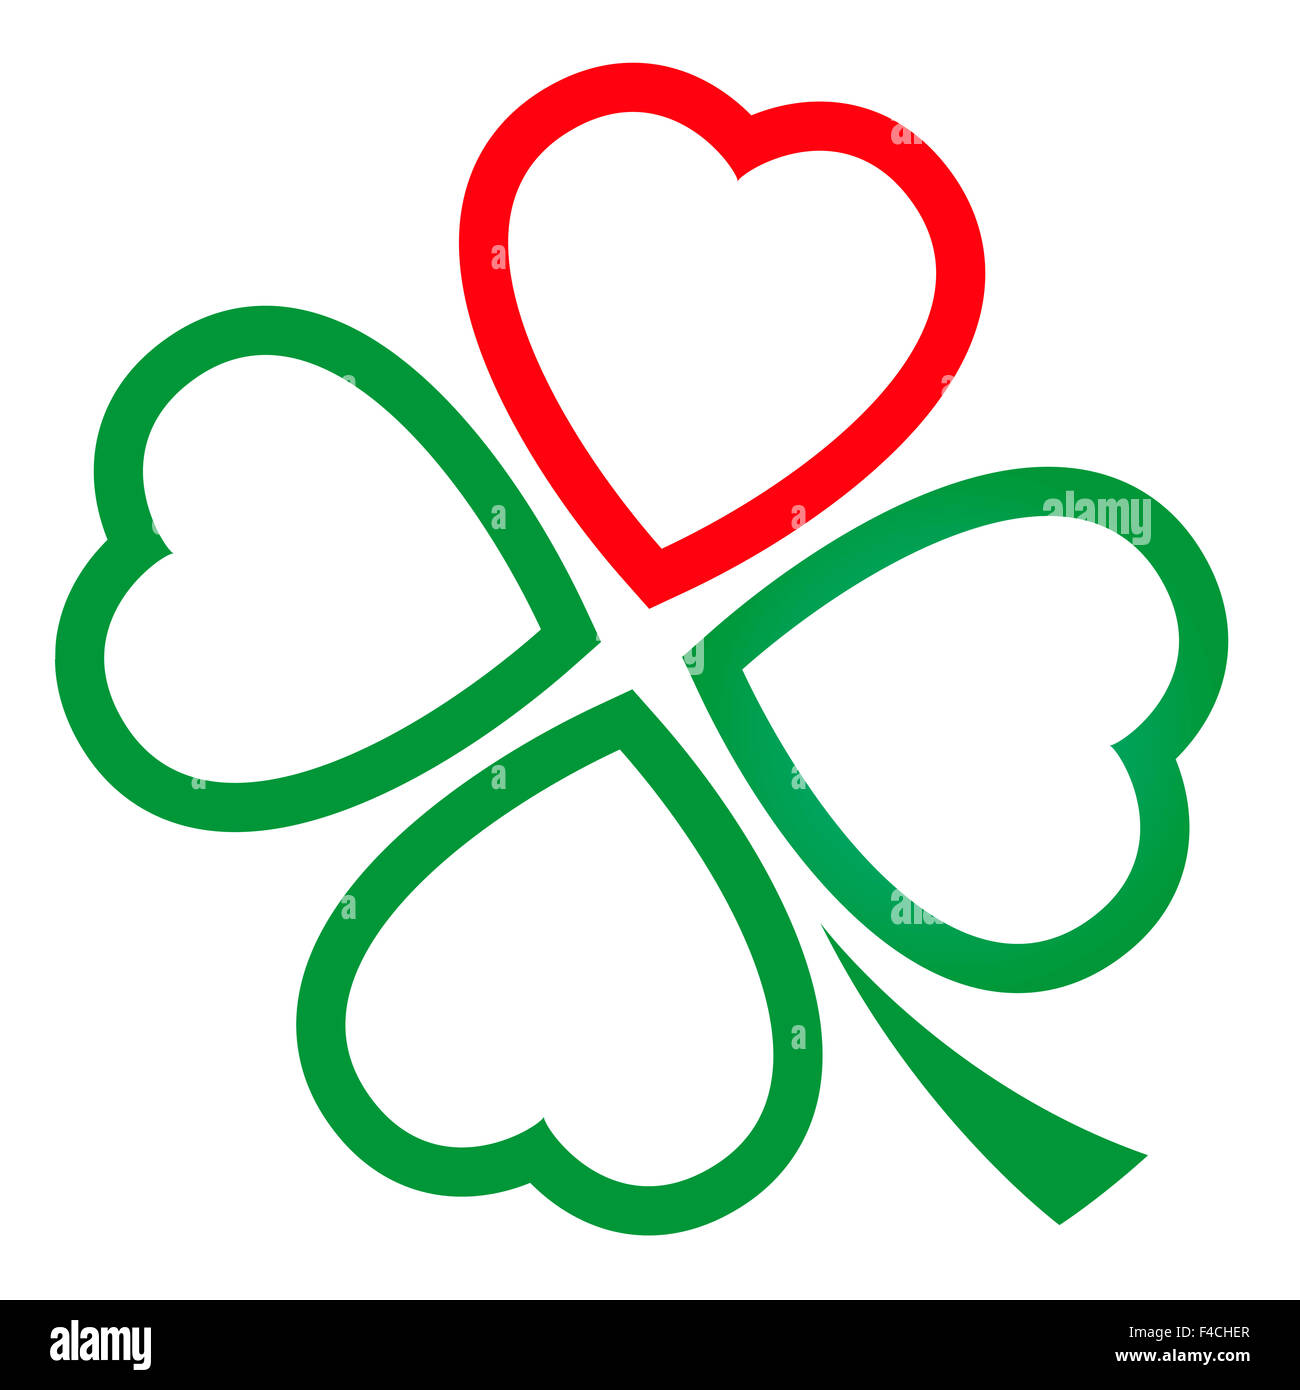 Cloverleaf made of one red heart and three green hearts. Illustration over white background. Stock Photo